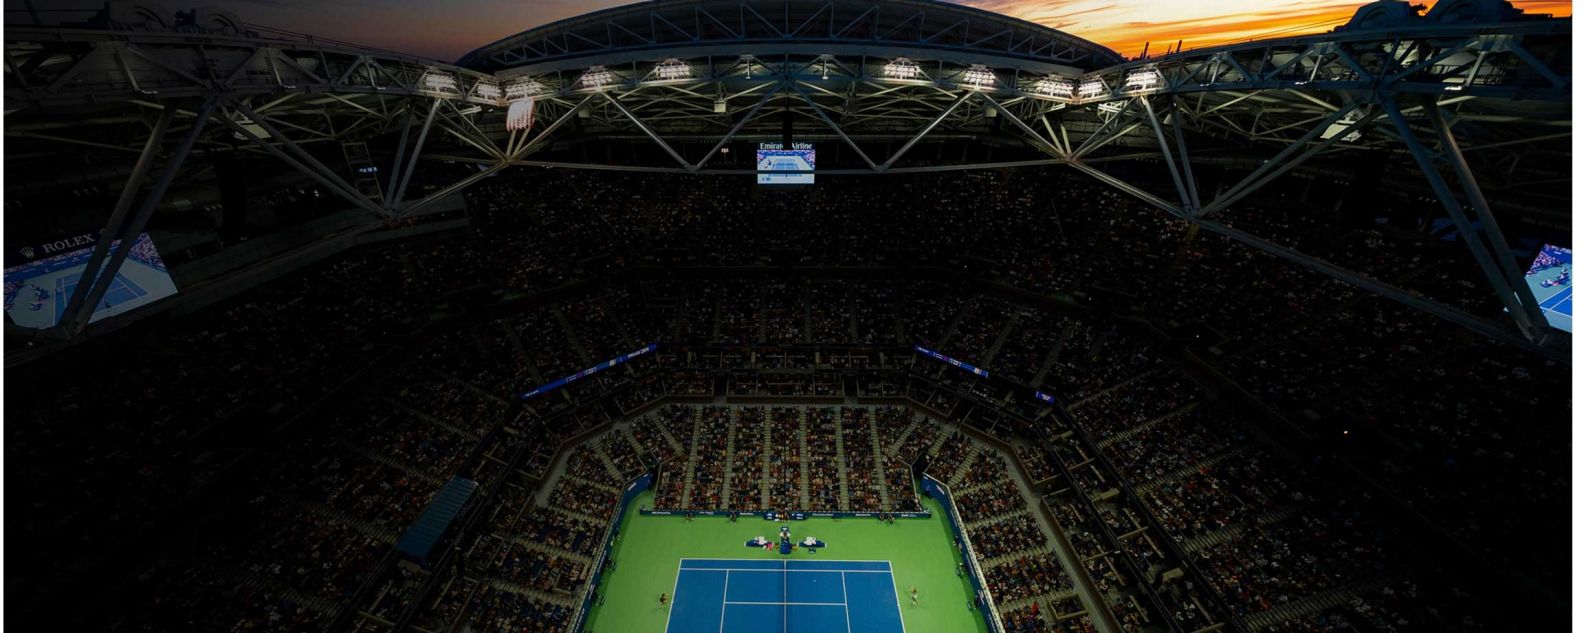 US Open 2023: Stadium view from above